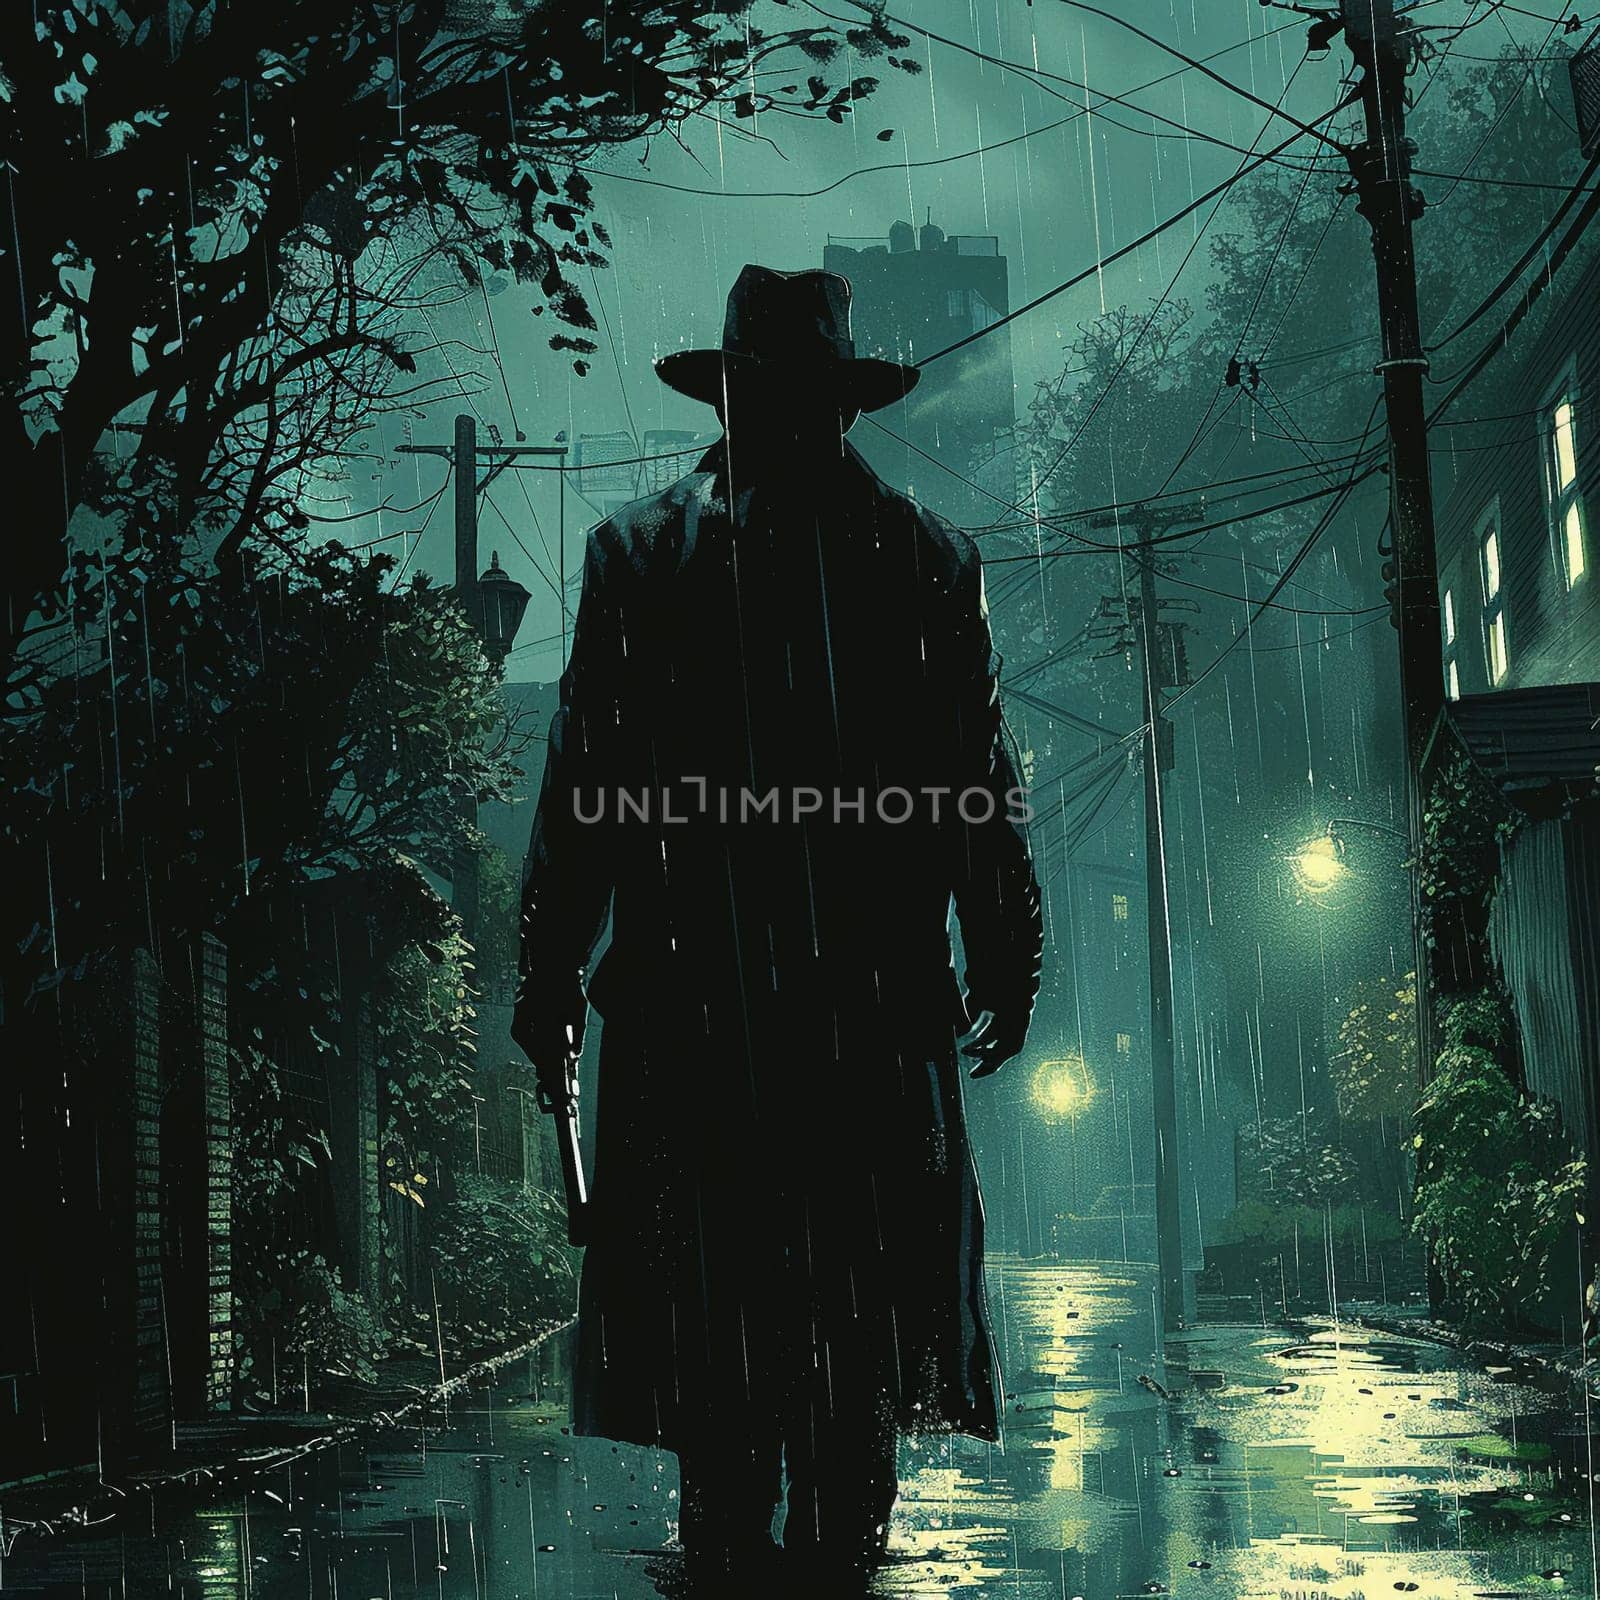 Classic noir style illustration of detective solving mystery on rainy World Water Day